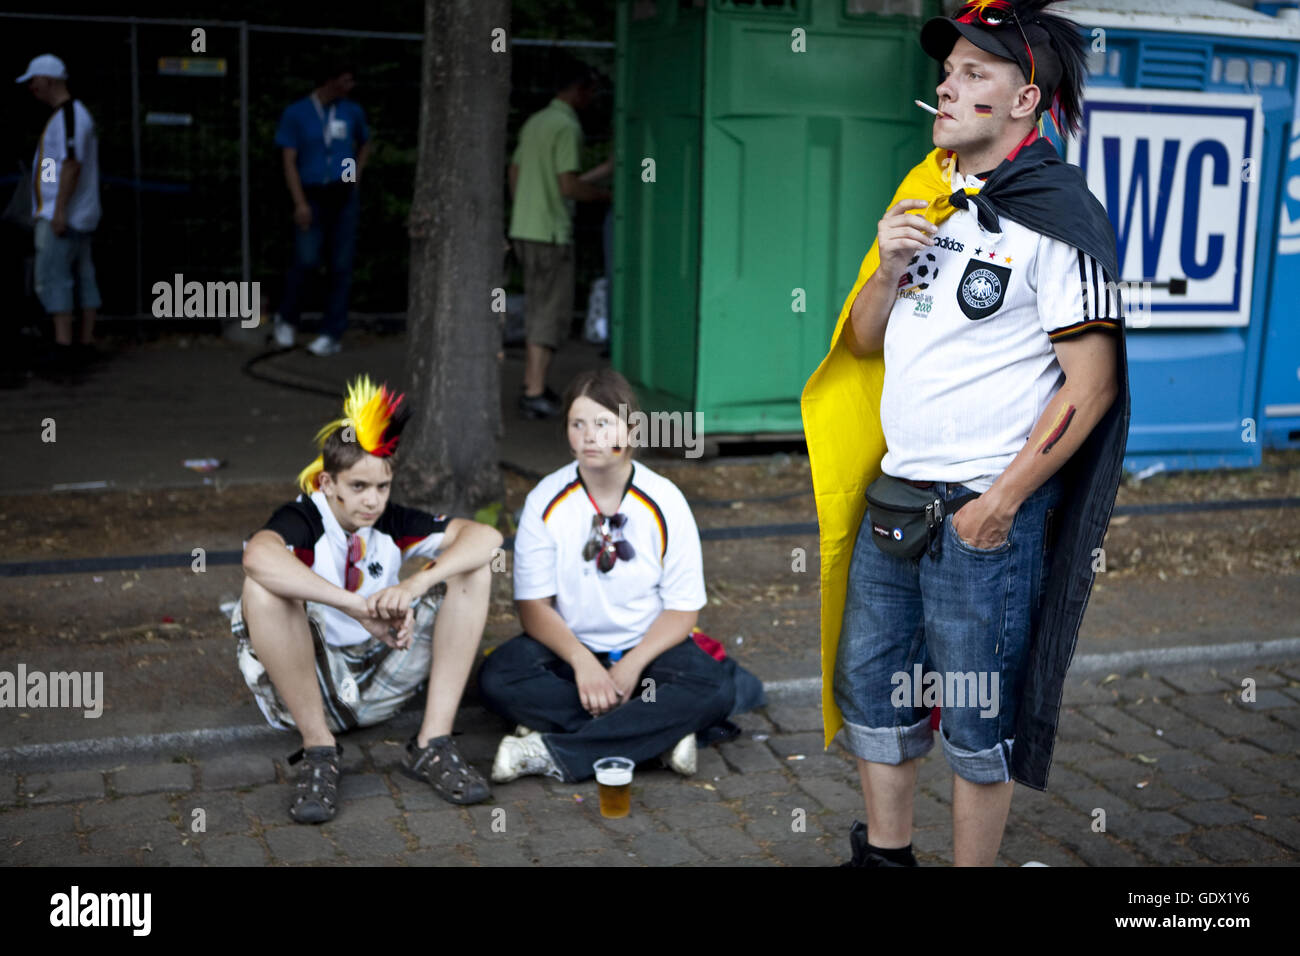 The German Fan Mile at the World Cup in Berlin, Germany, 2010 Stock Photo